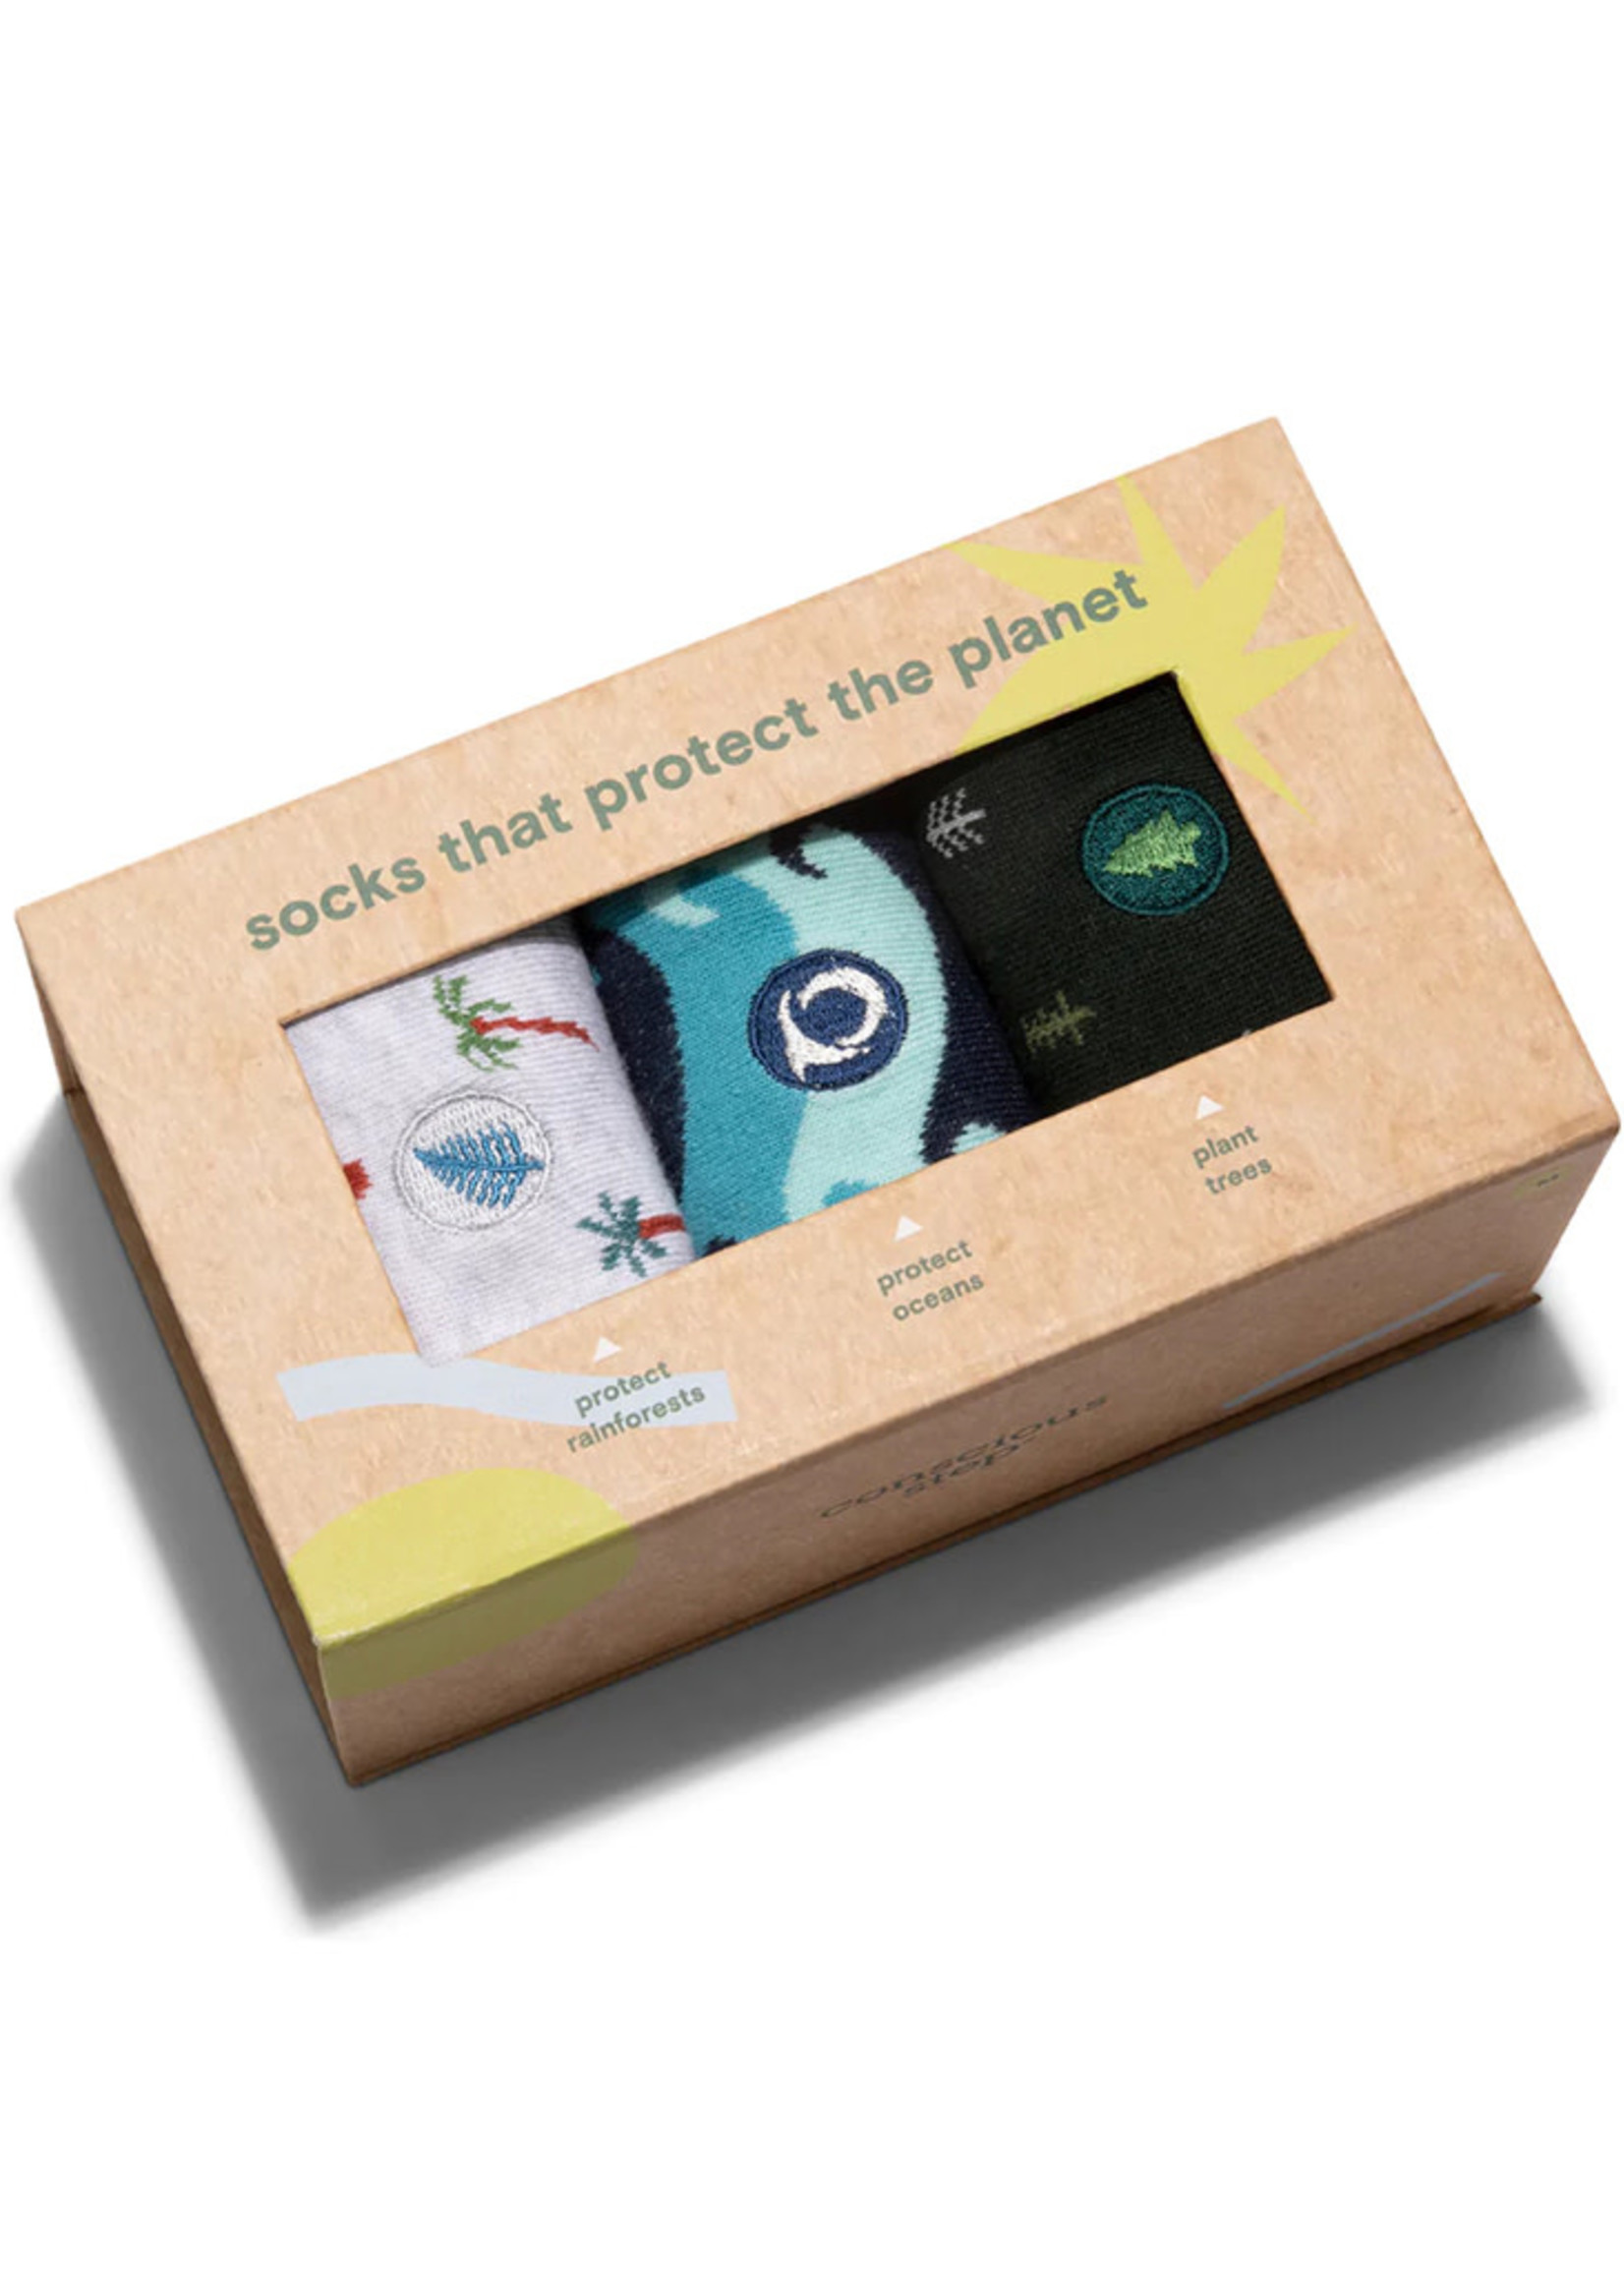 Conscious Step Women's Sock Box that Protect The Planet